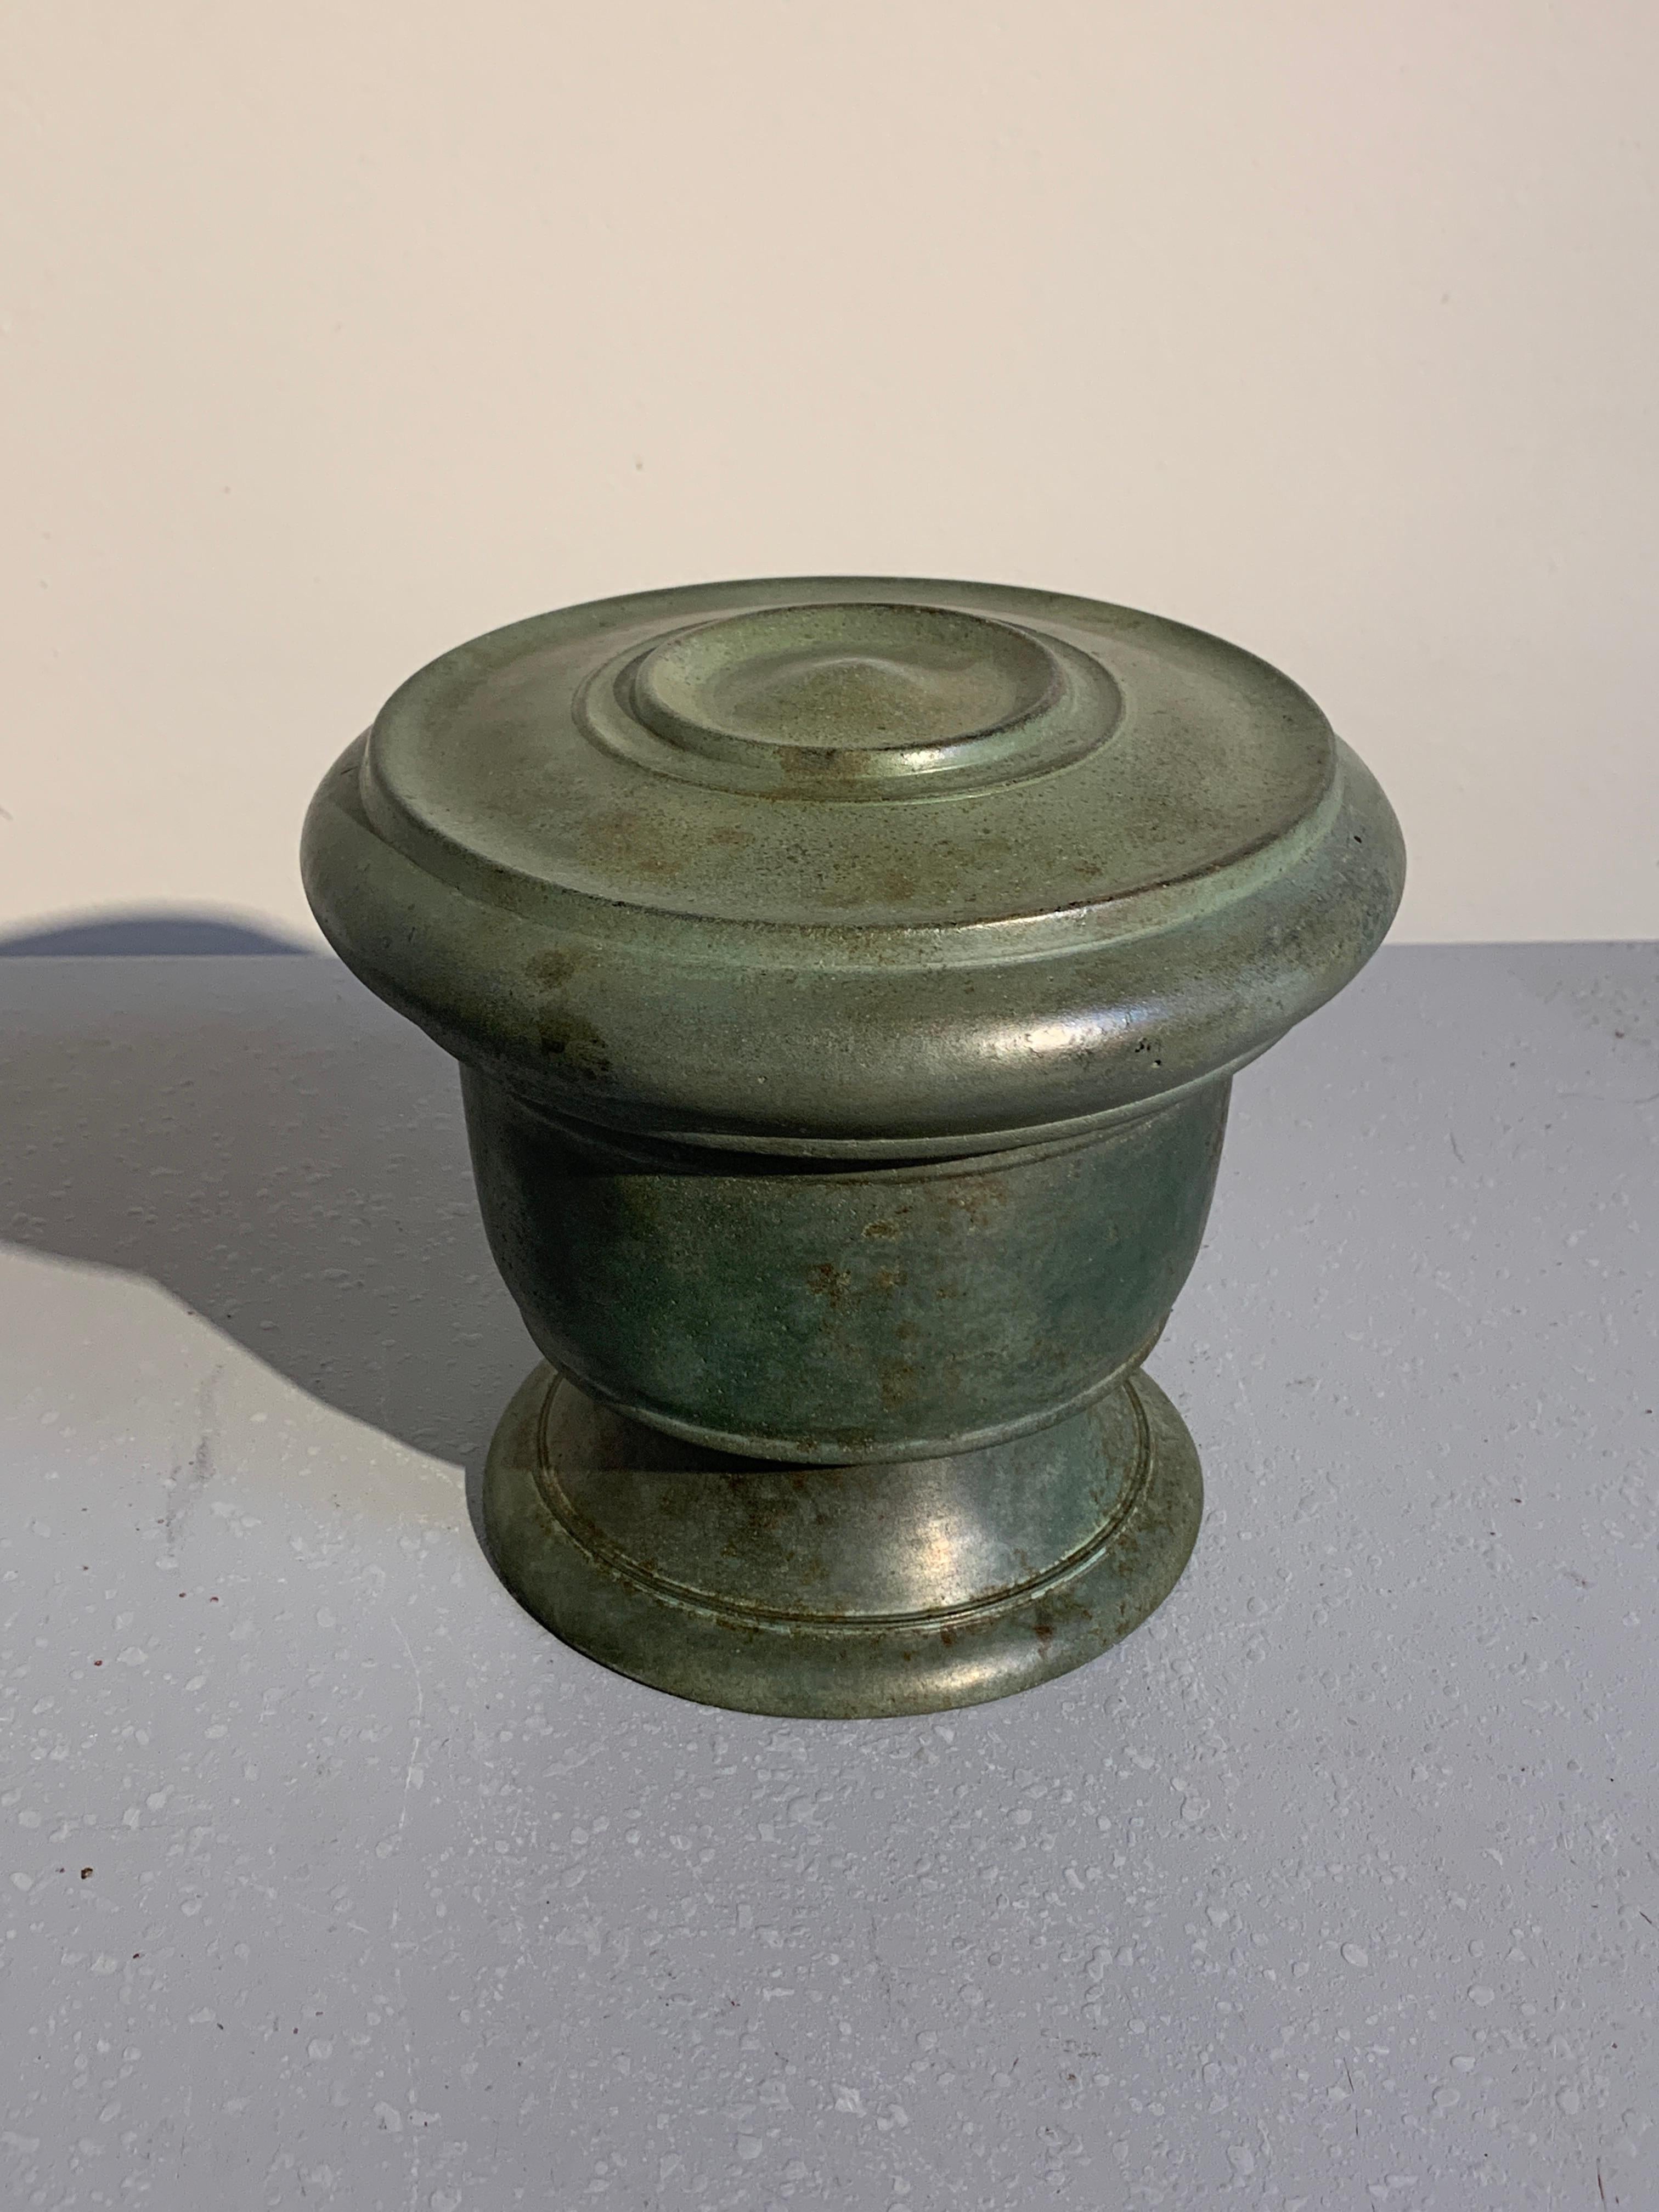 A stunning and rare Javanese bronze footed offering vessel and cover, Central Javanese Period, 8th-10th century.

The ritual offering vessel of elegant form, with a wide splayed foot and squat pedestal supporting the body of the bowl. The deep